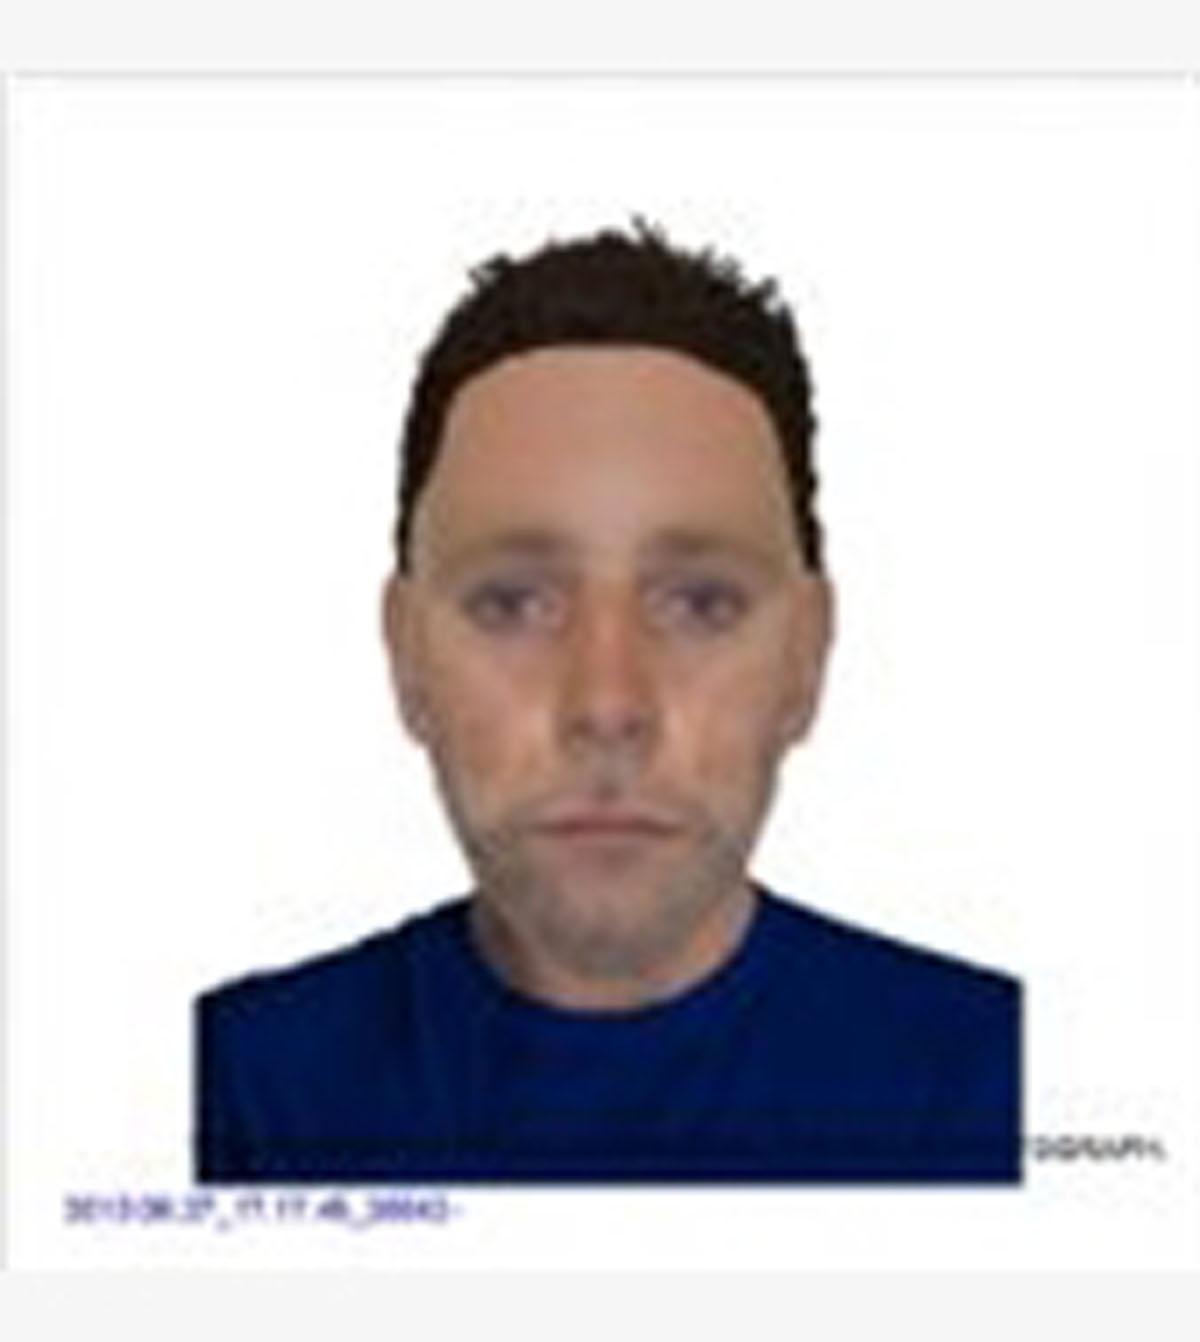 This is an artist's impression of a man who approached a 12-year-old girl in Worthing driving a silver Skoda and asked her to get into the car on Jun 20, 2013. She did the right thing by running away and reporting this to police. "The girl was shaken but 